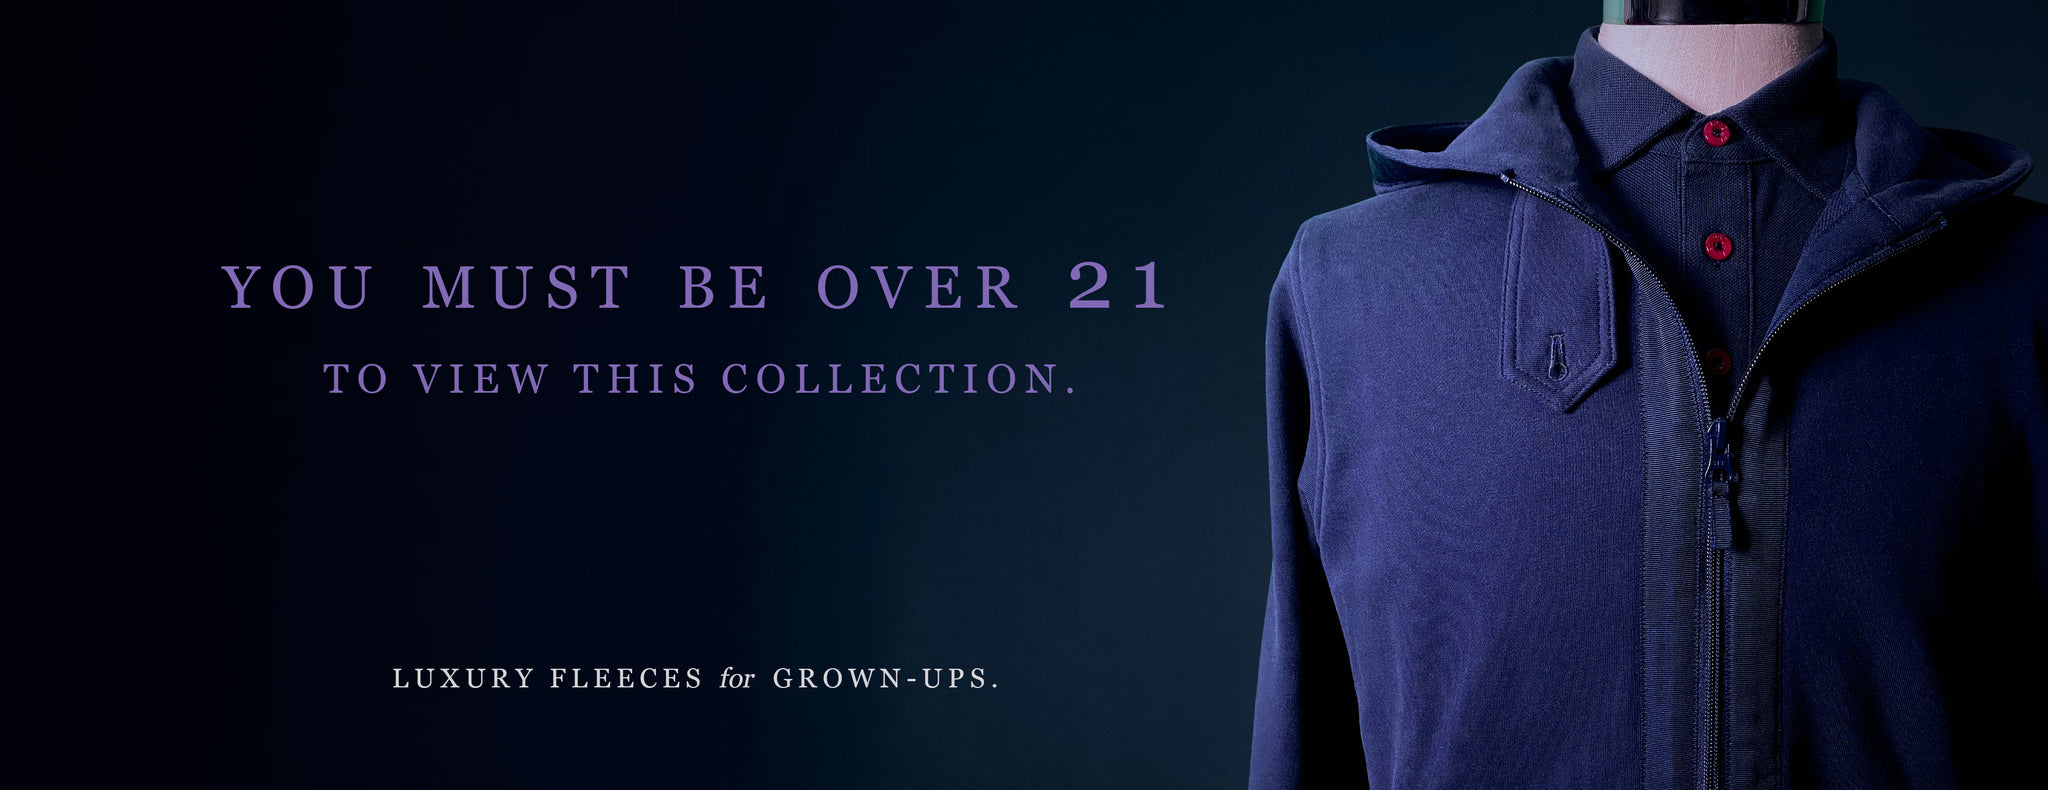 You must be over 21 to view this collection (joke). Luxury fleeces for grown-ups.